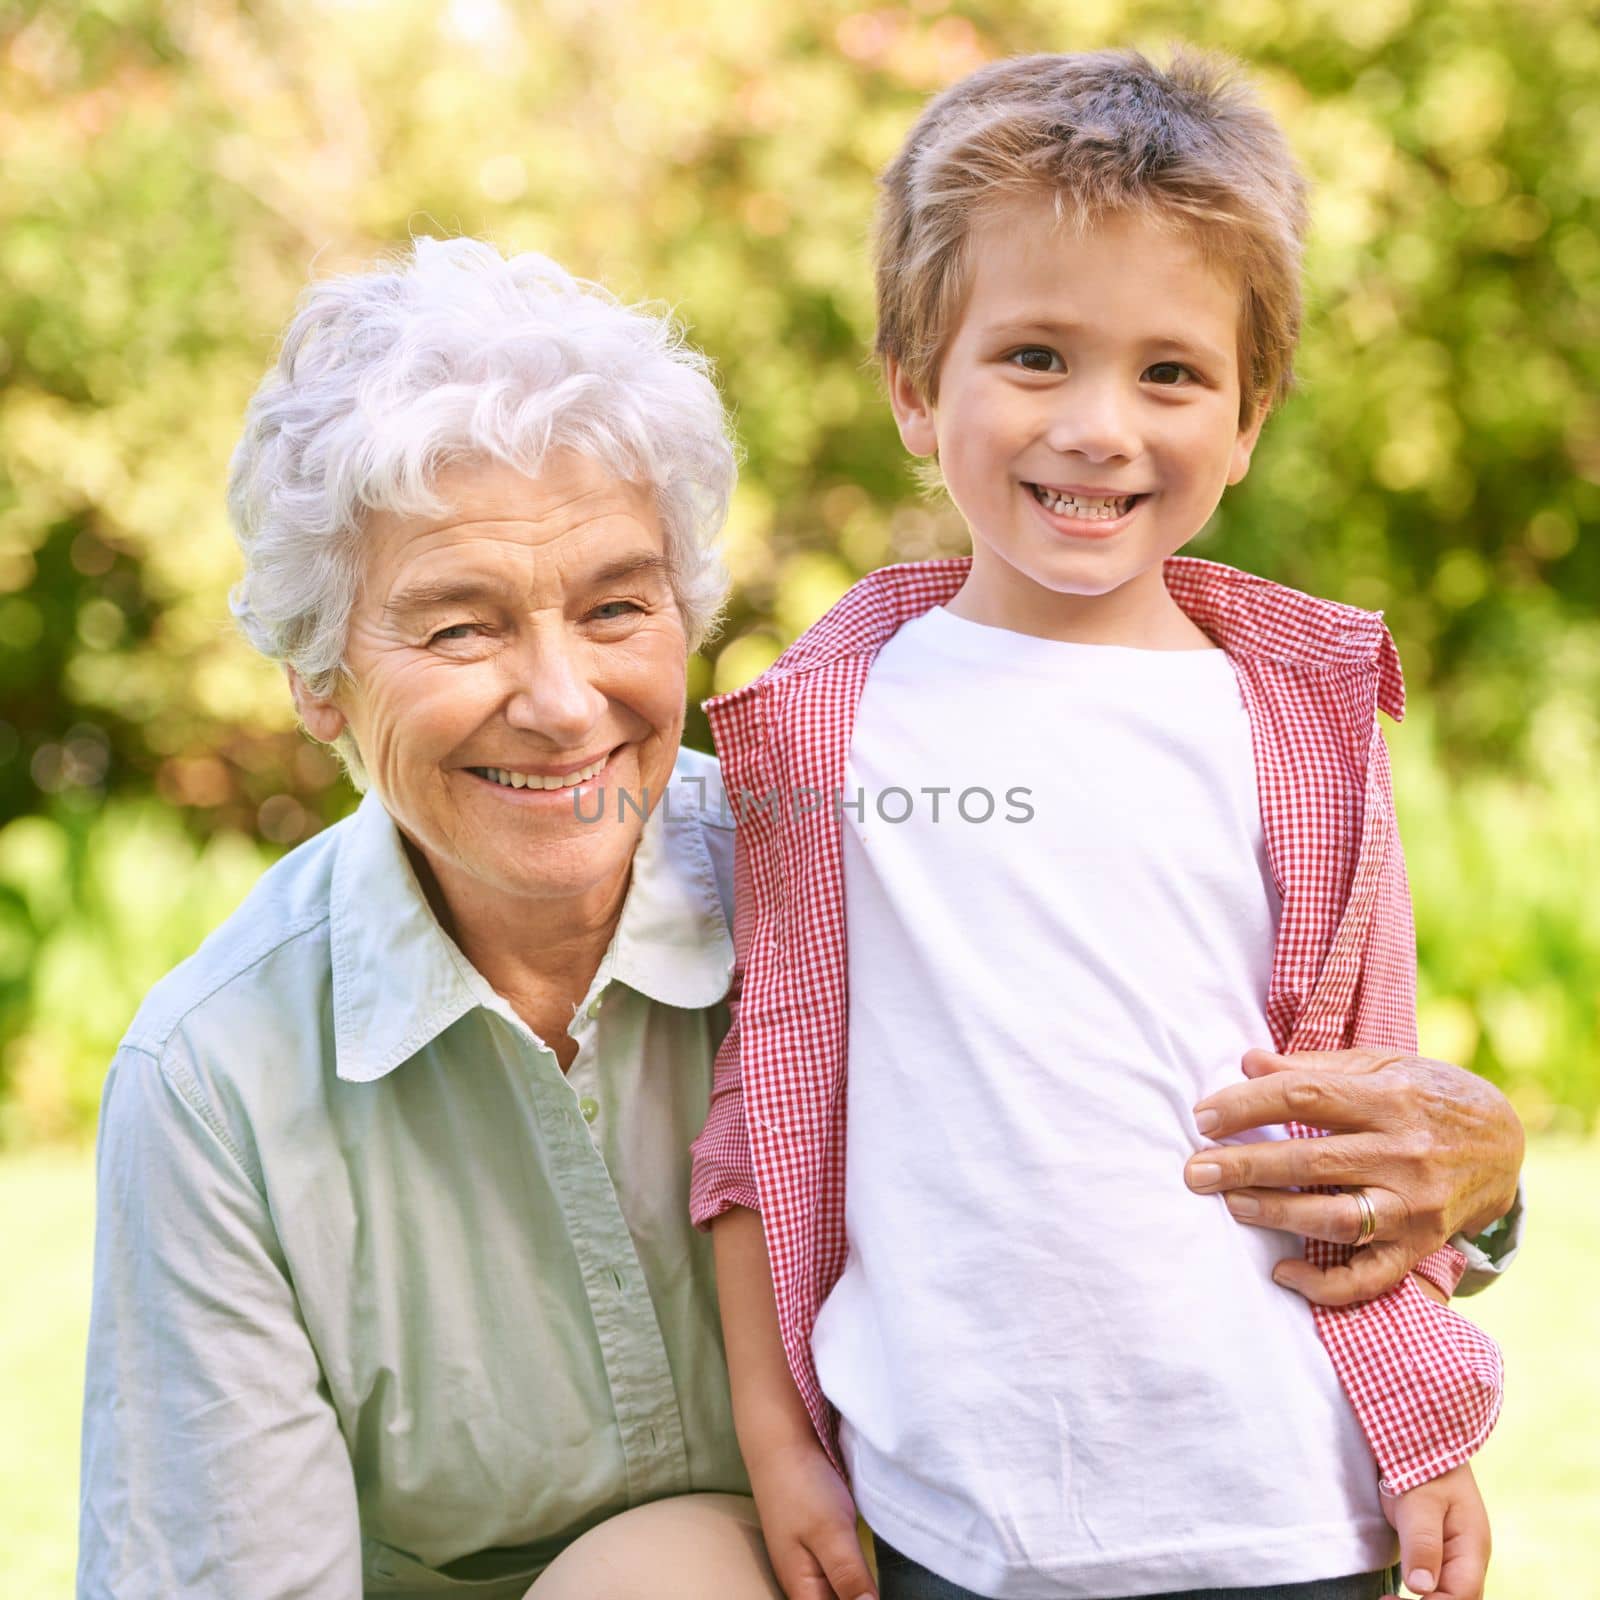 Me and my grandma. Portrait of a little boy with his grandmother in the outdoors